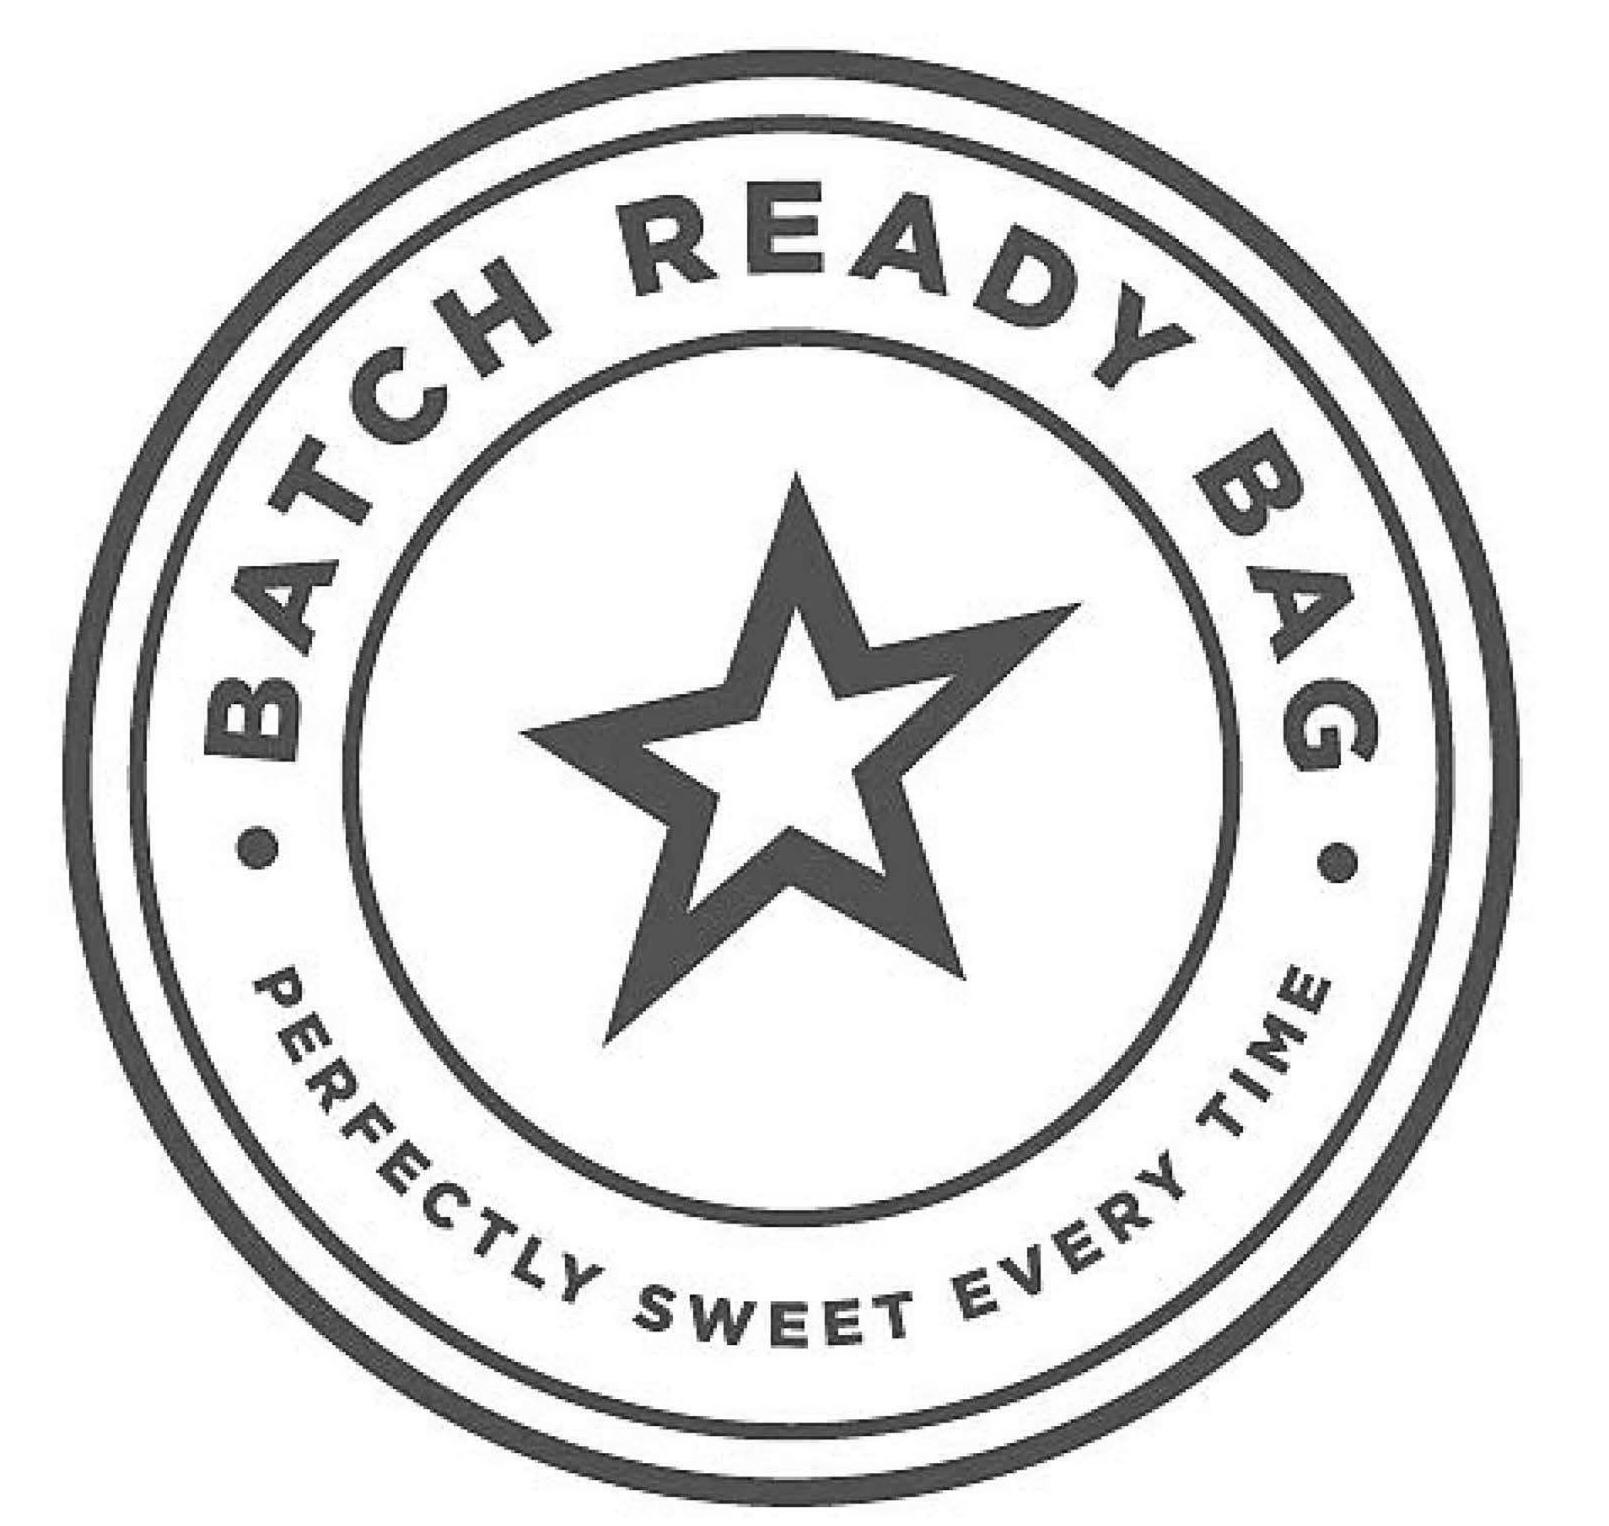  BATCH READY BAG PERFECTLY SWEET EVERY TIME